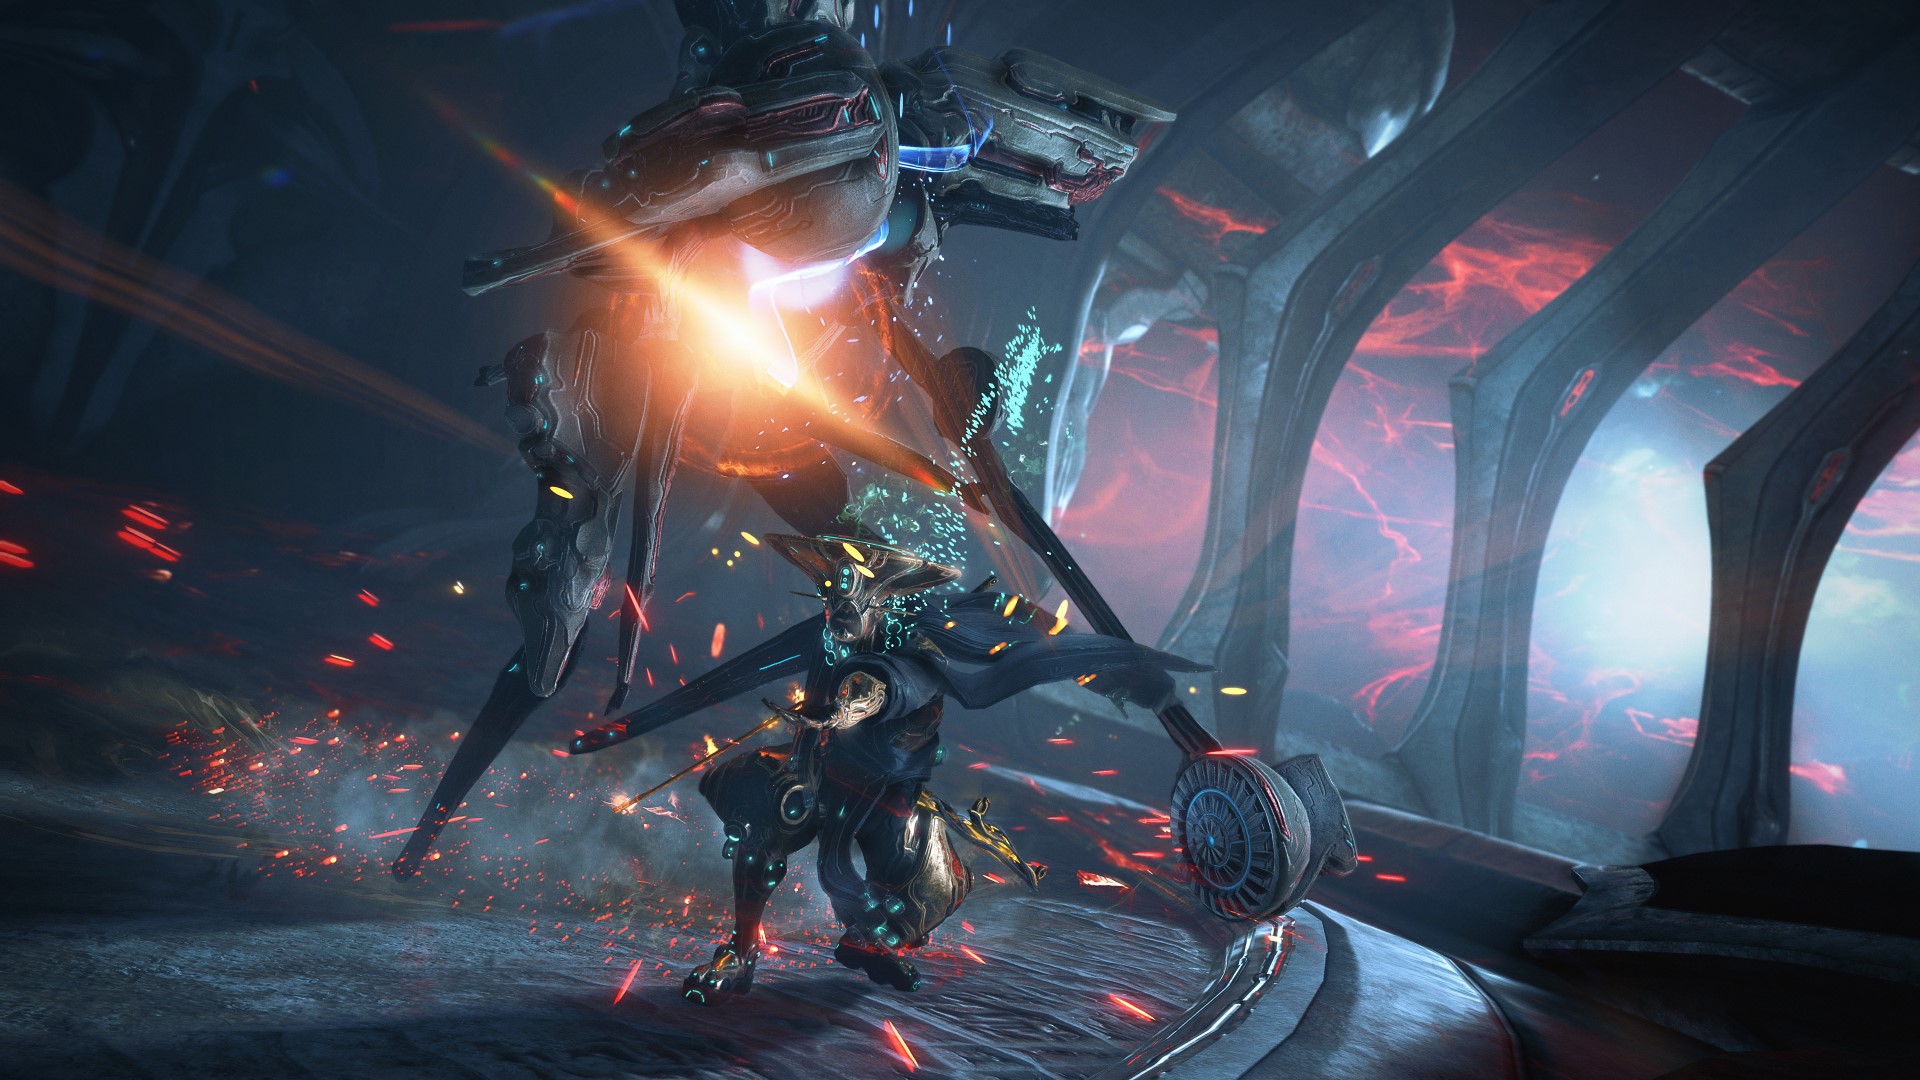 Warframe's New War picks up narrative threads that have been dangling for years